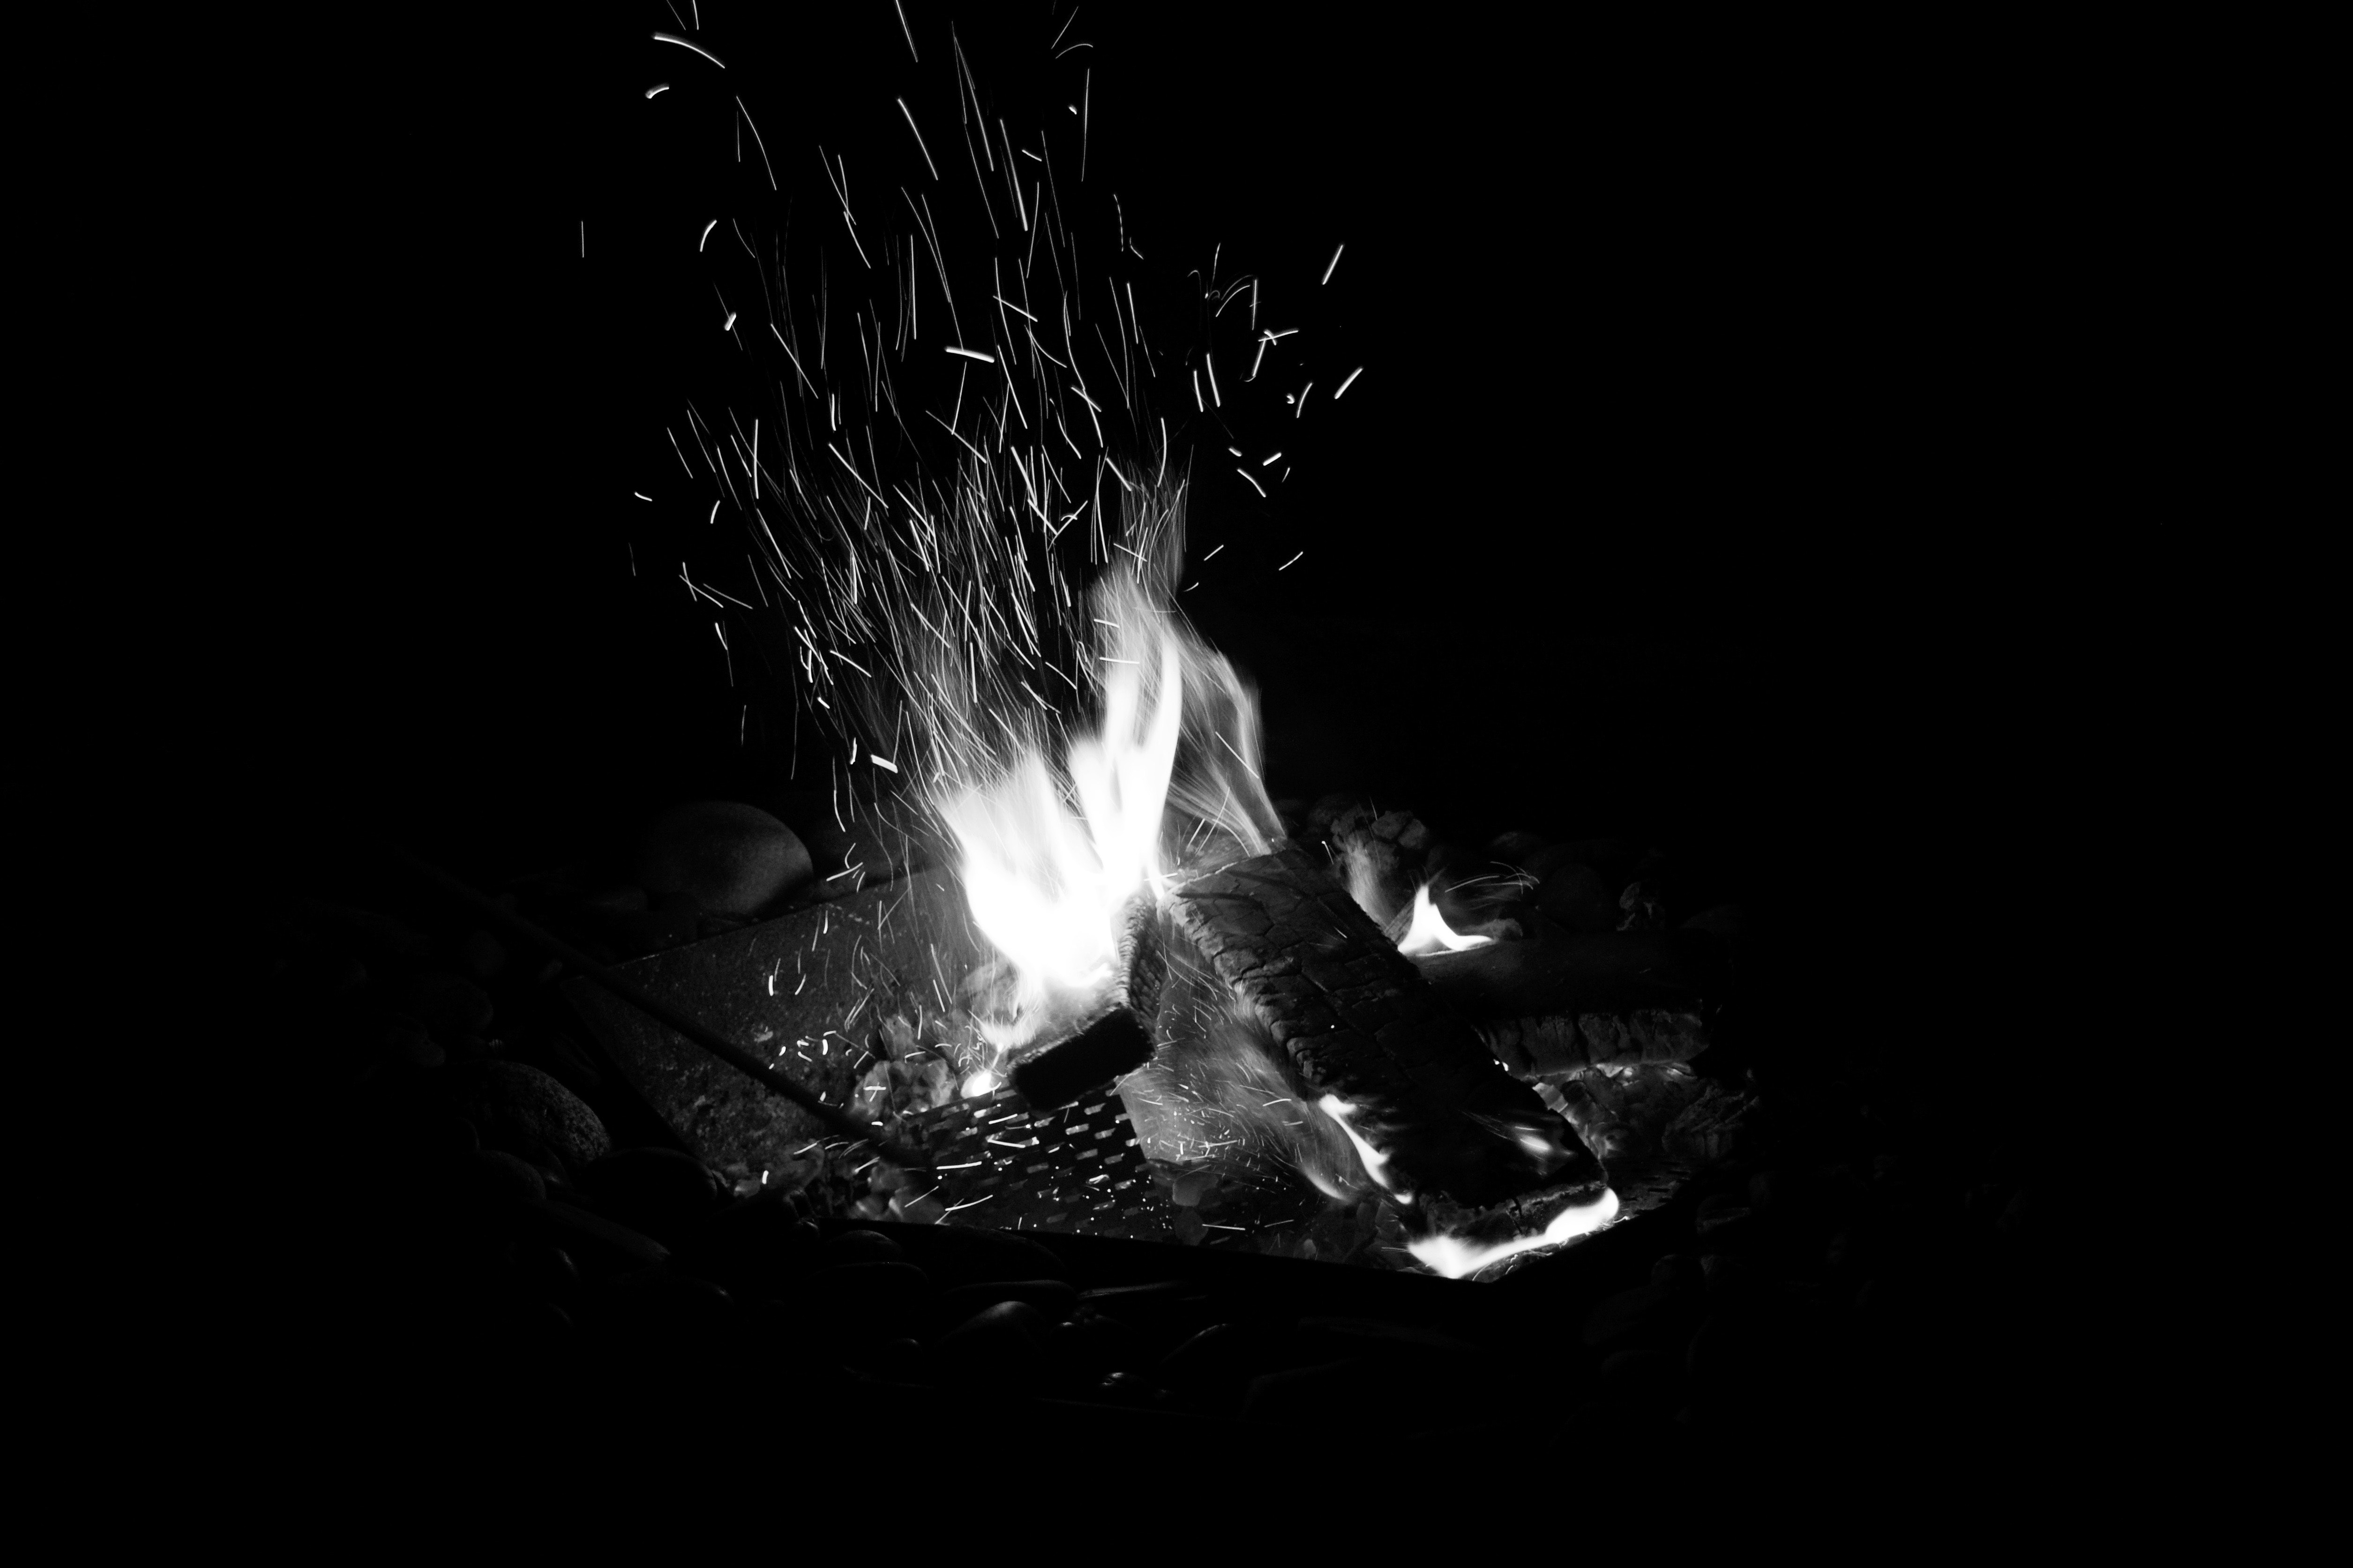 Camping Fire during Nighttime, Firewoods, Night, Luminescence, Insubstantial, HQ Photo